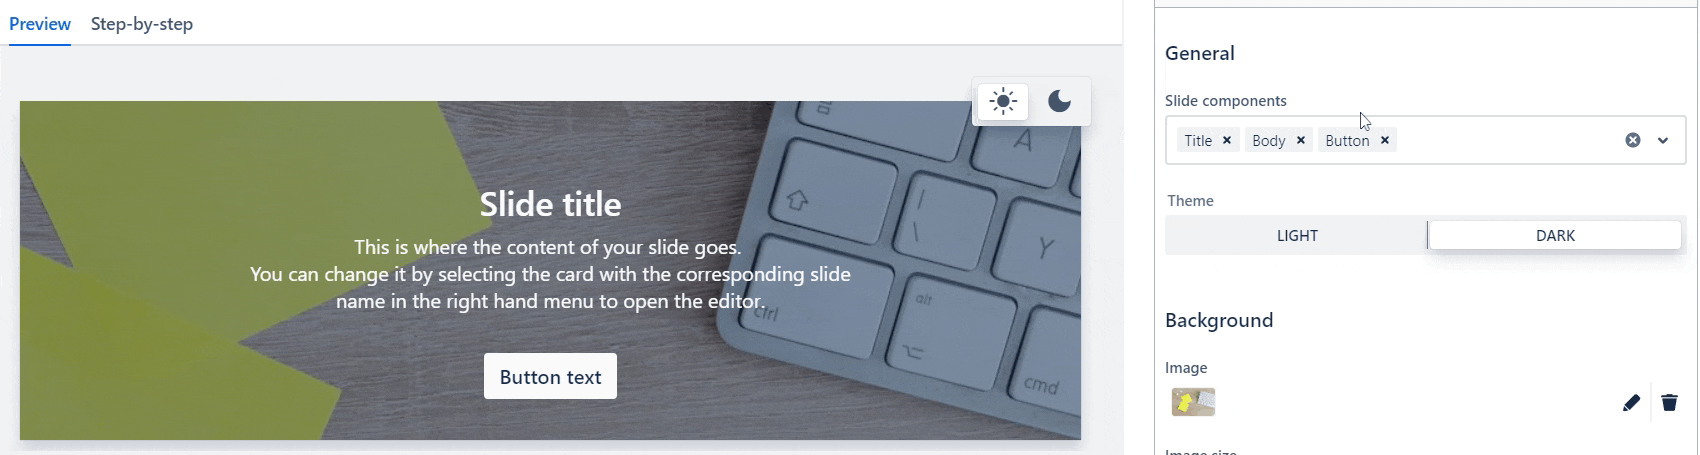 GIF of a user removing the button component from an interactive banner in Confluence